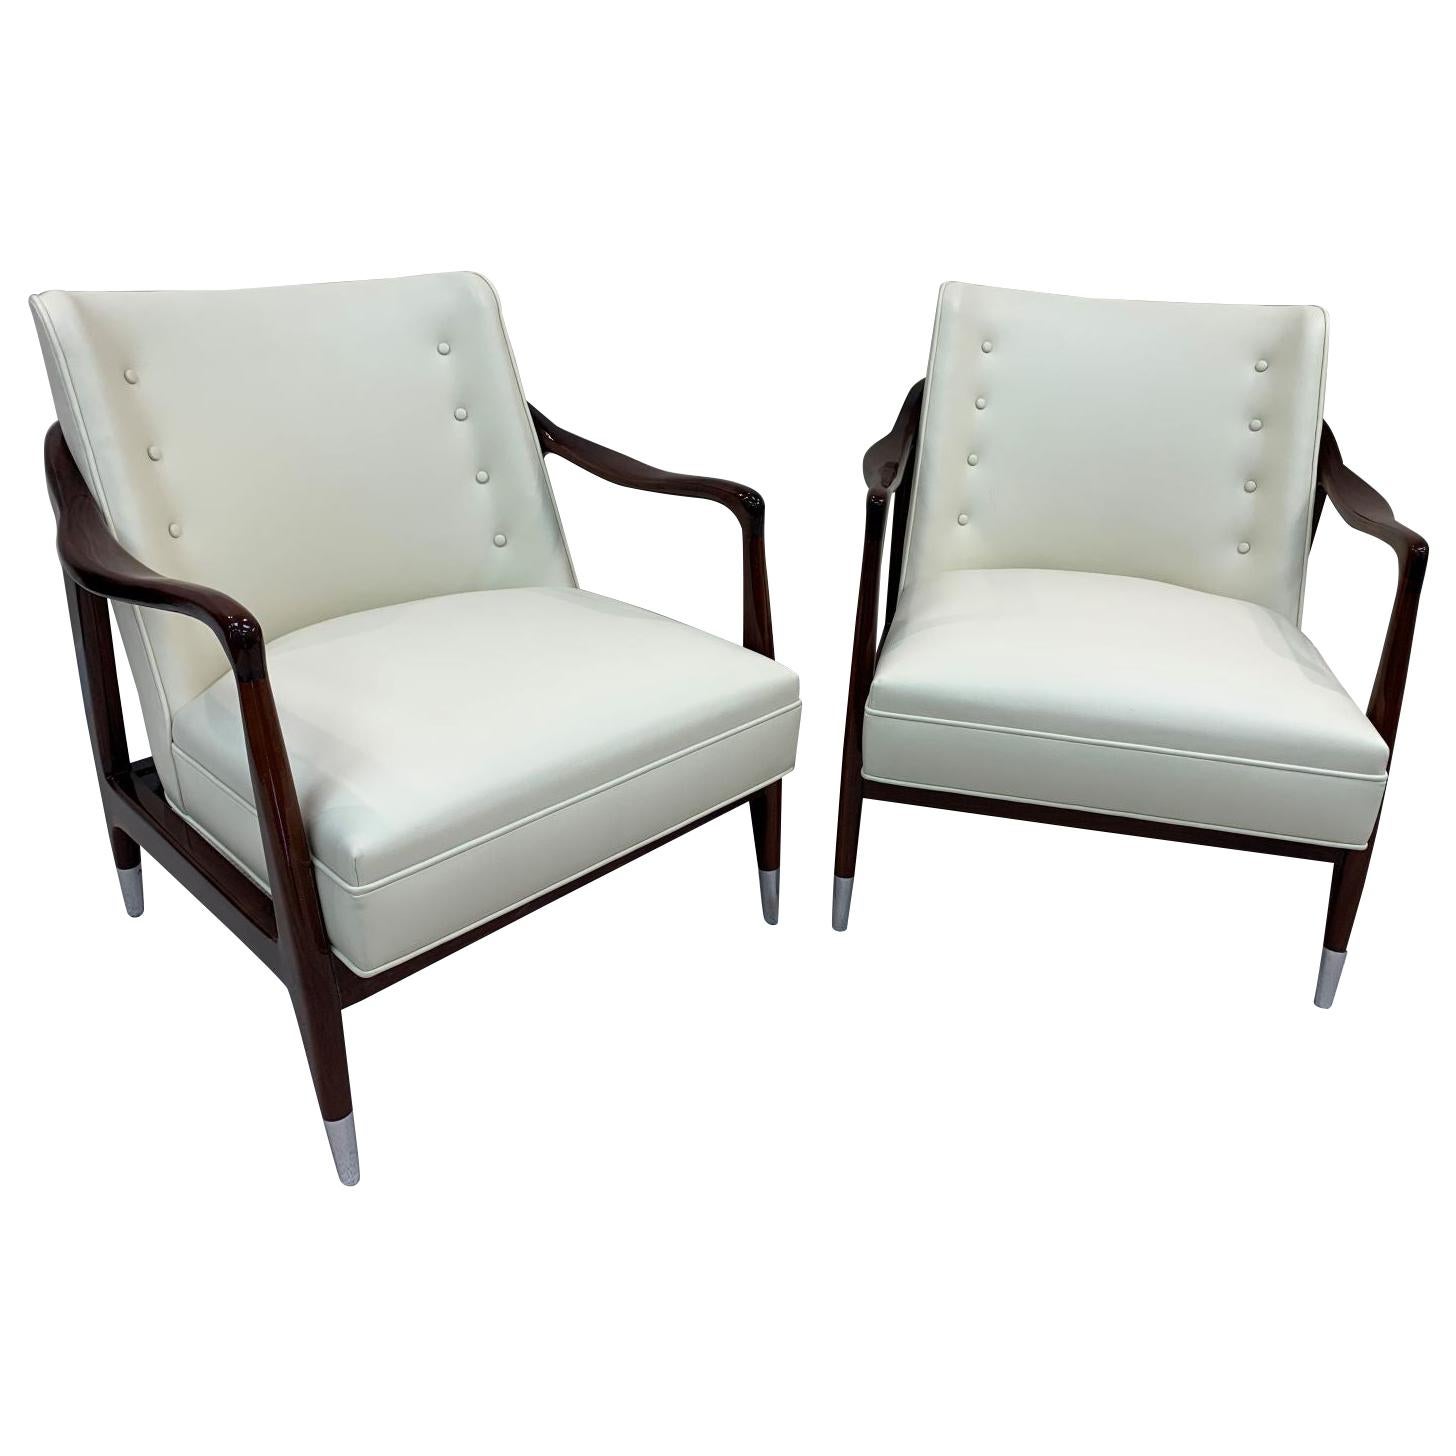 Gio Ponti Style Sculptural Pair of Mid Century Lounge Chairs and Ottoman 